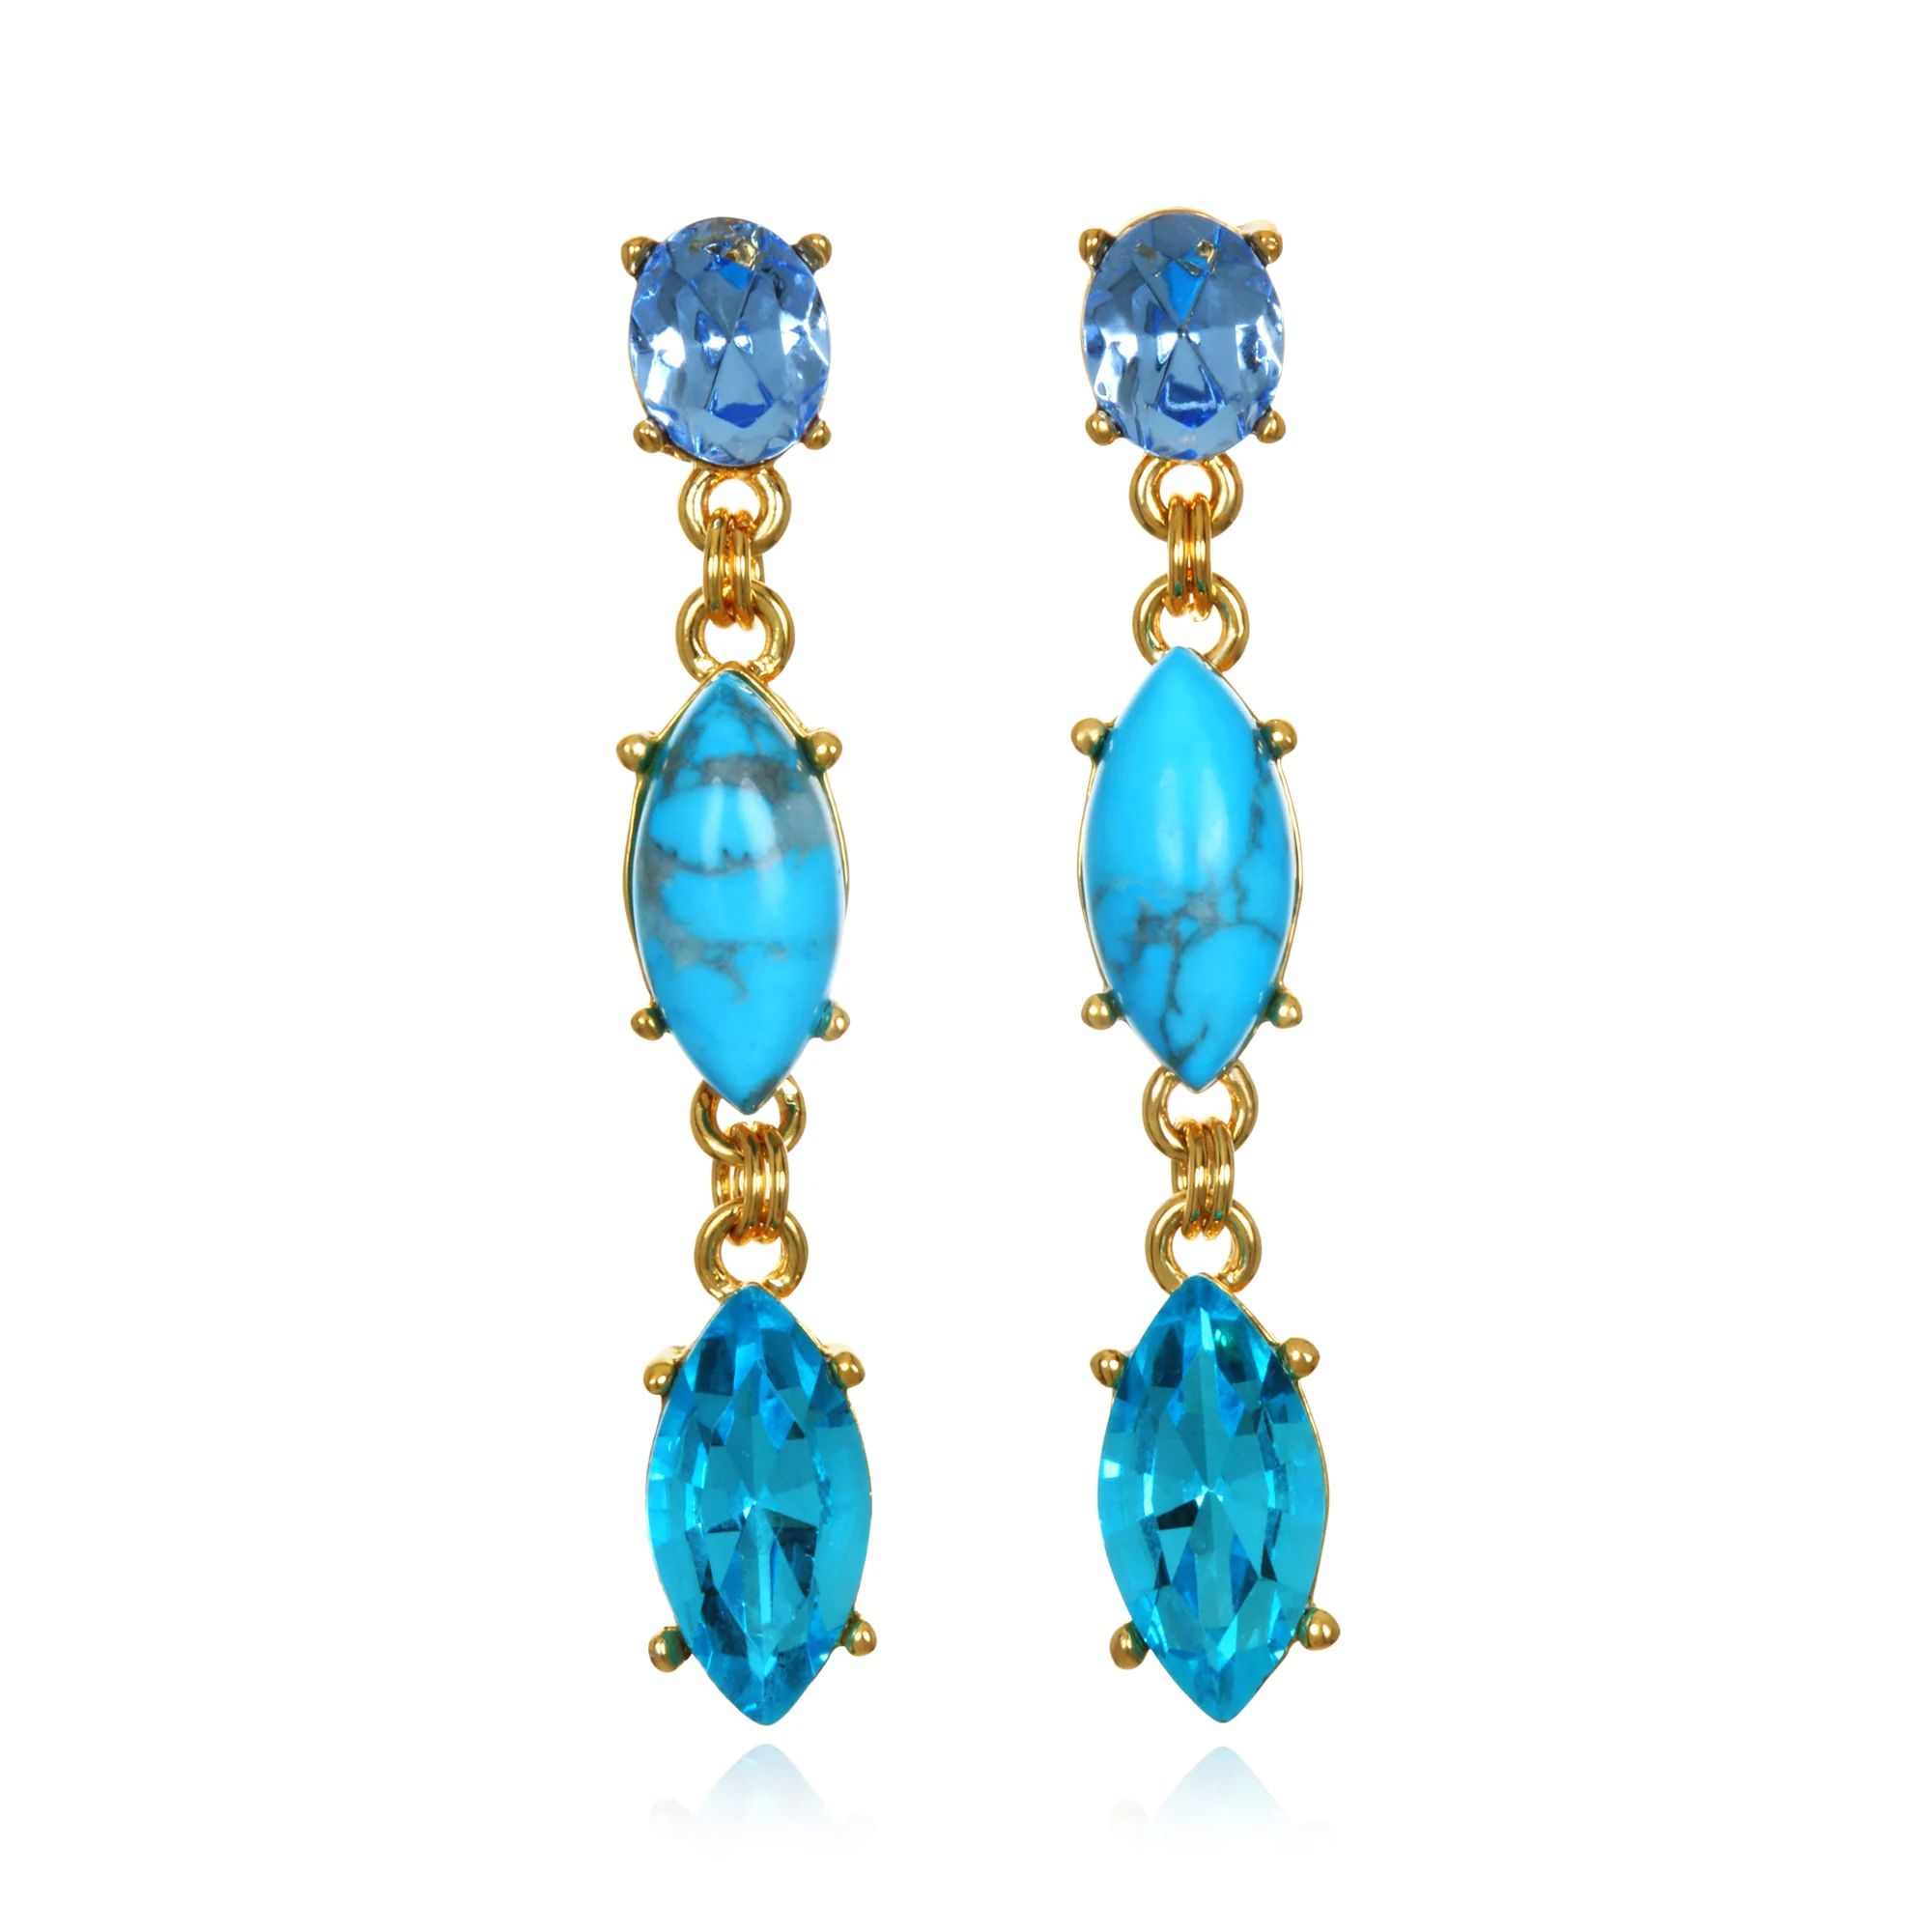 Jeweled Turquoise Drop Earrings | Sequin